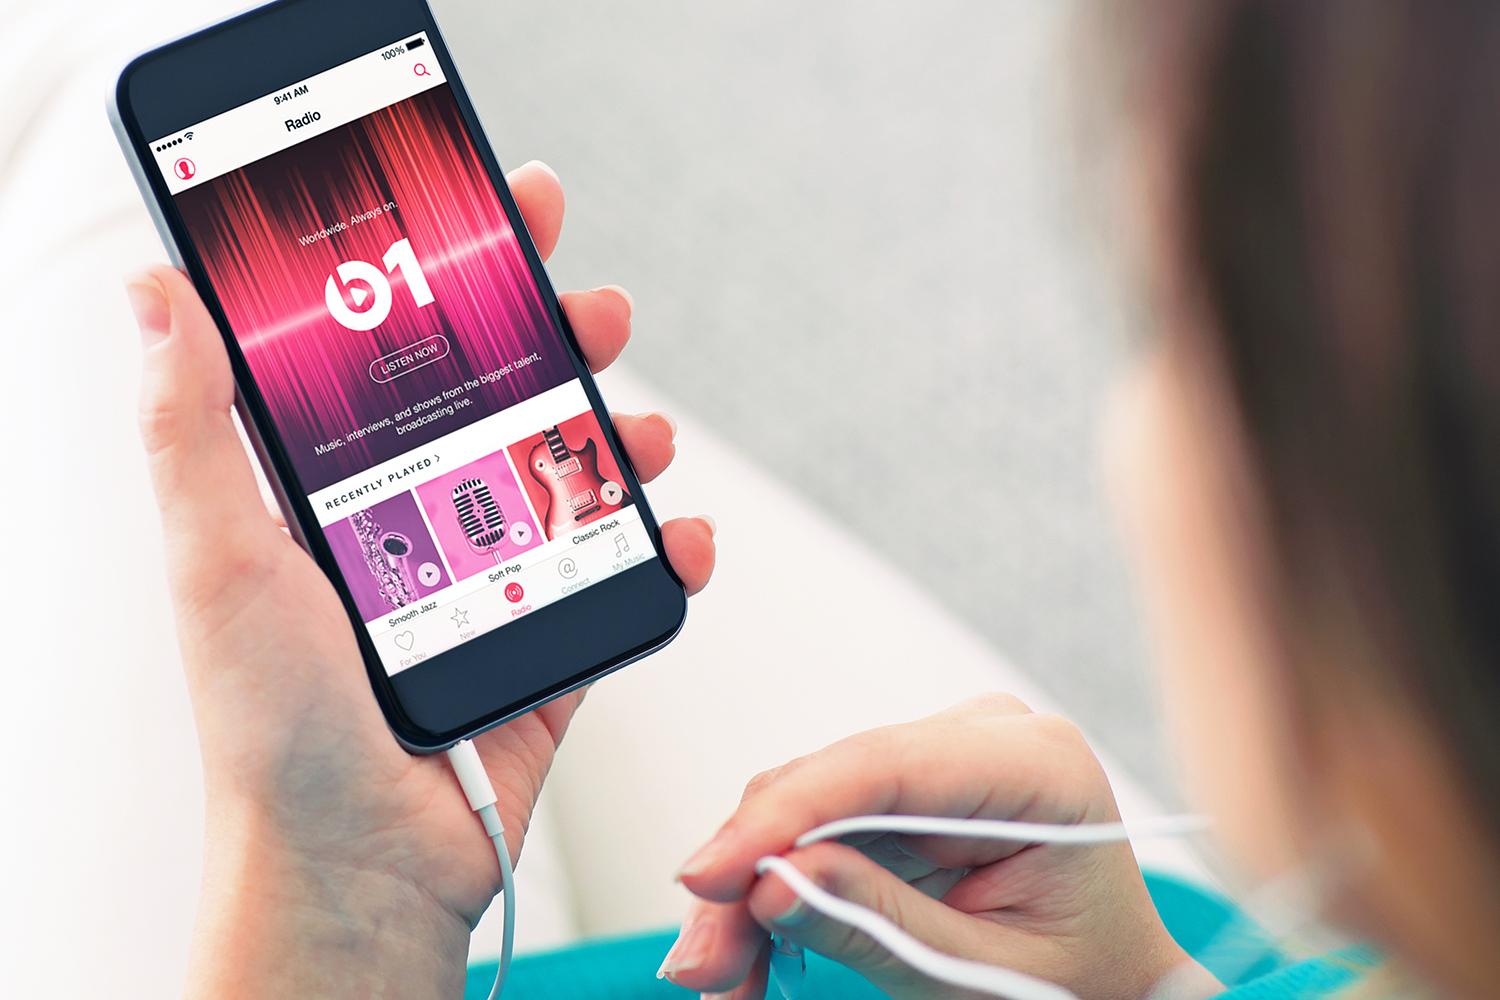 Apple is all set to revamp Apple Music after the one-year old music streaming service received mixed reviews from users.